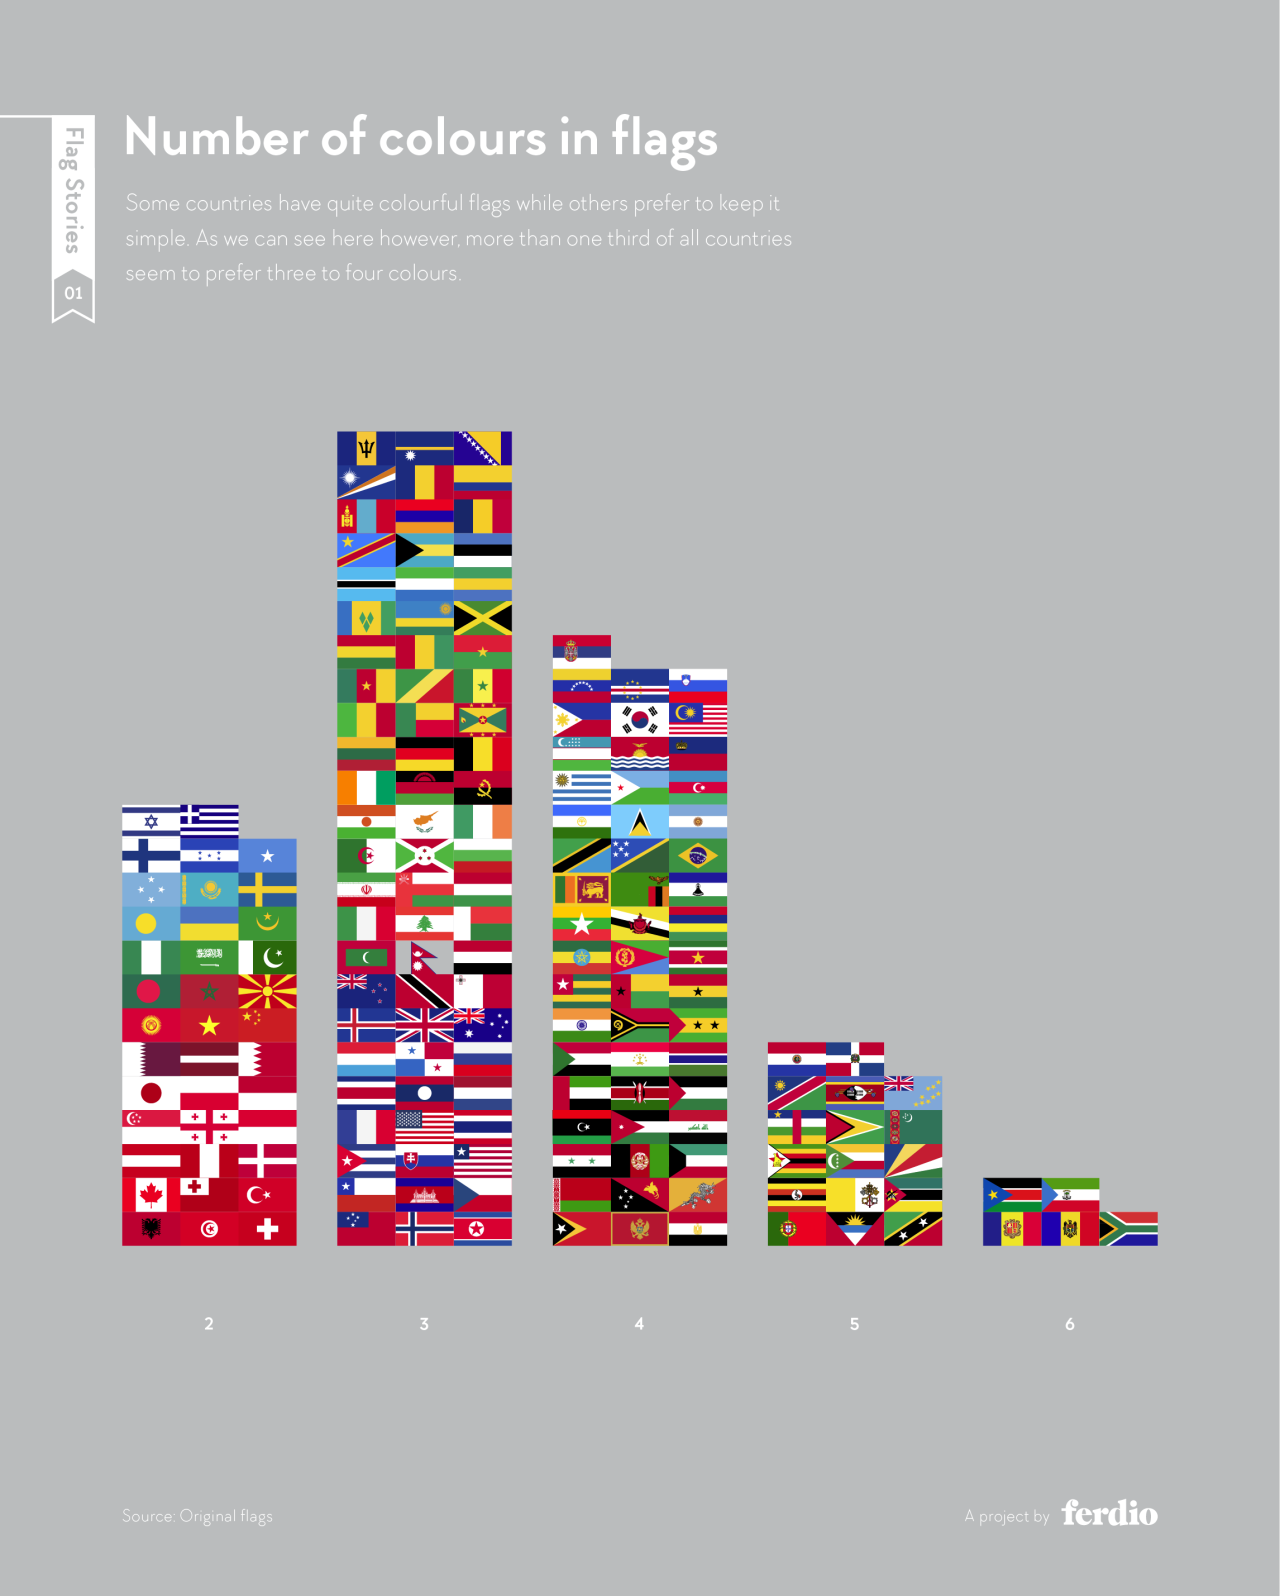 Number of Colours in Flags